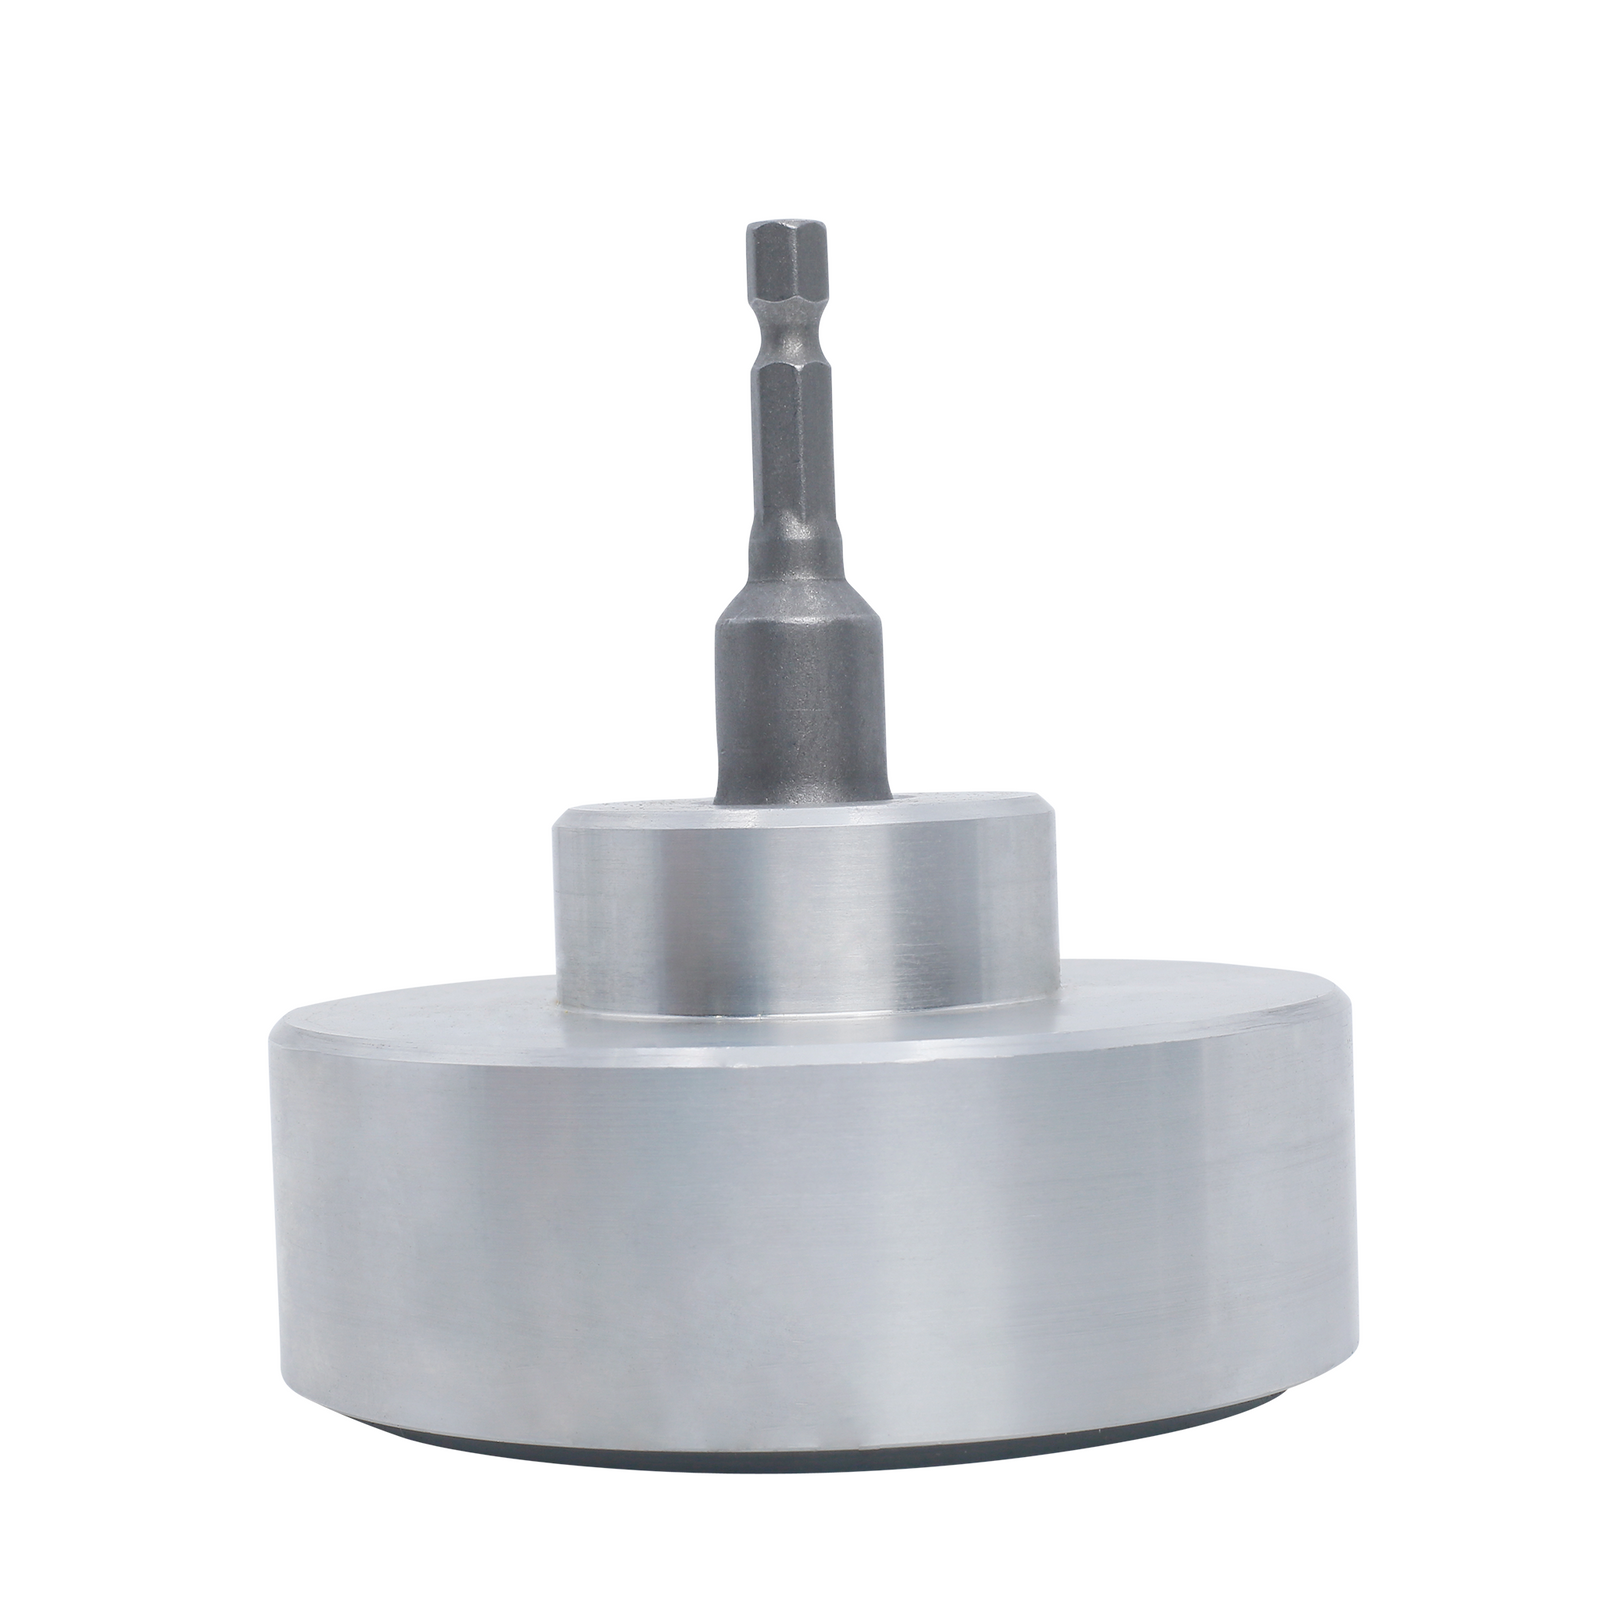 Capping chuck size 80 compatible with manual cappers and pneumatic drills